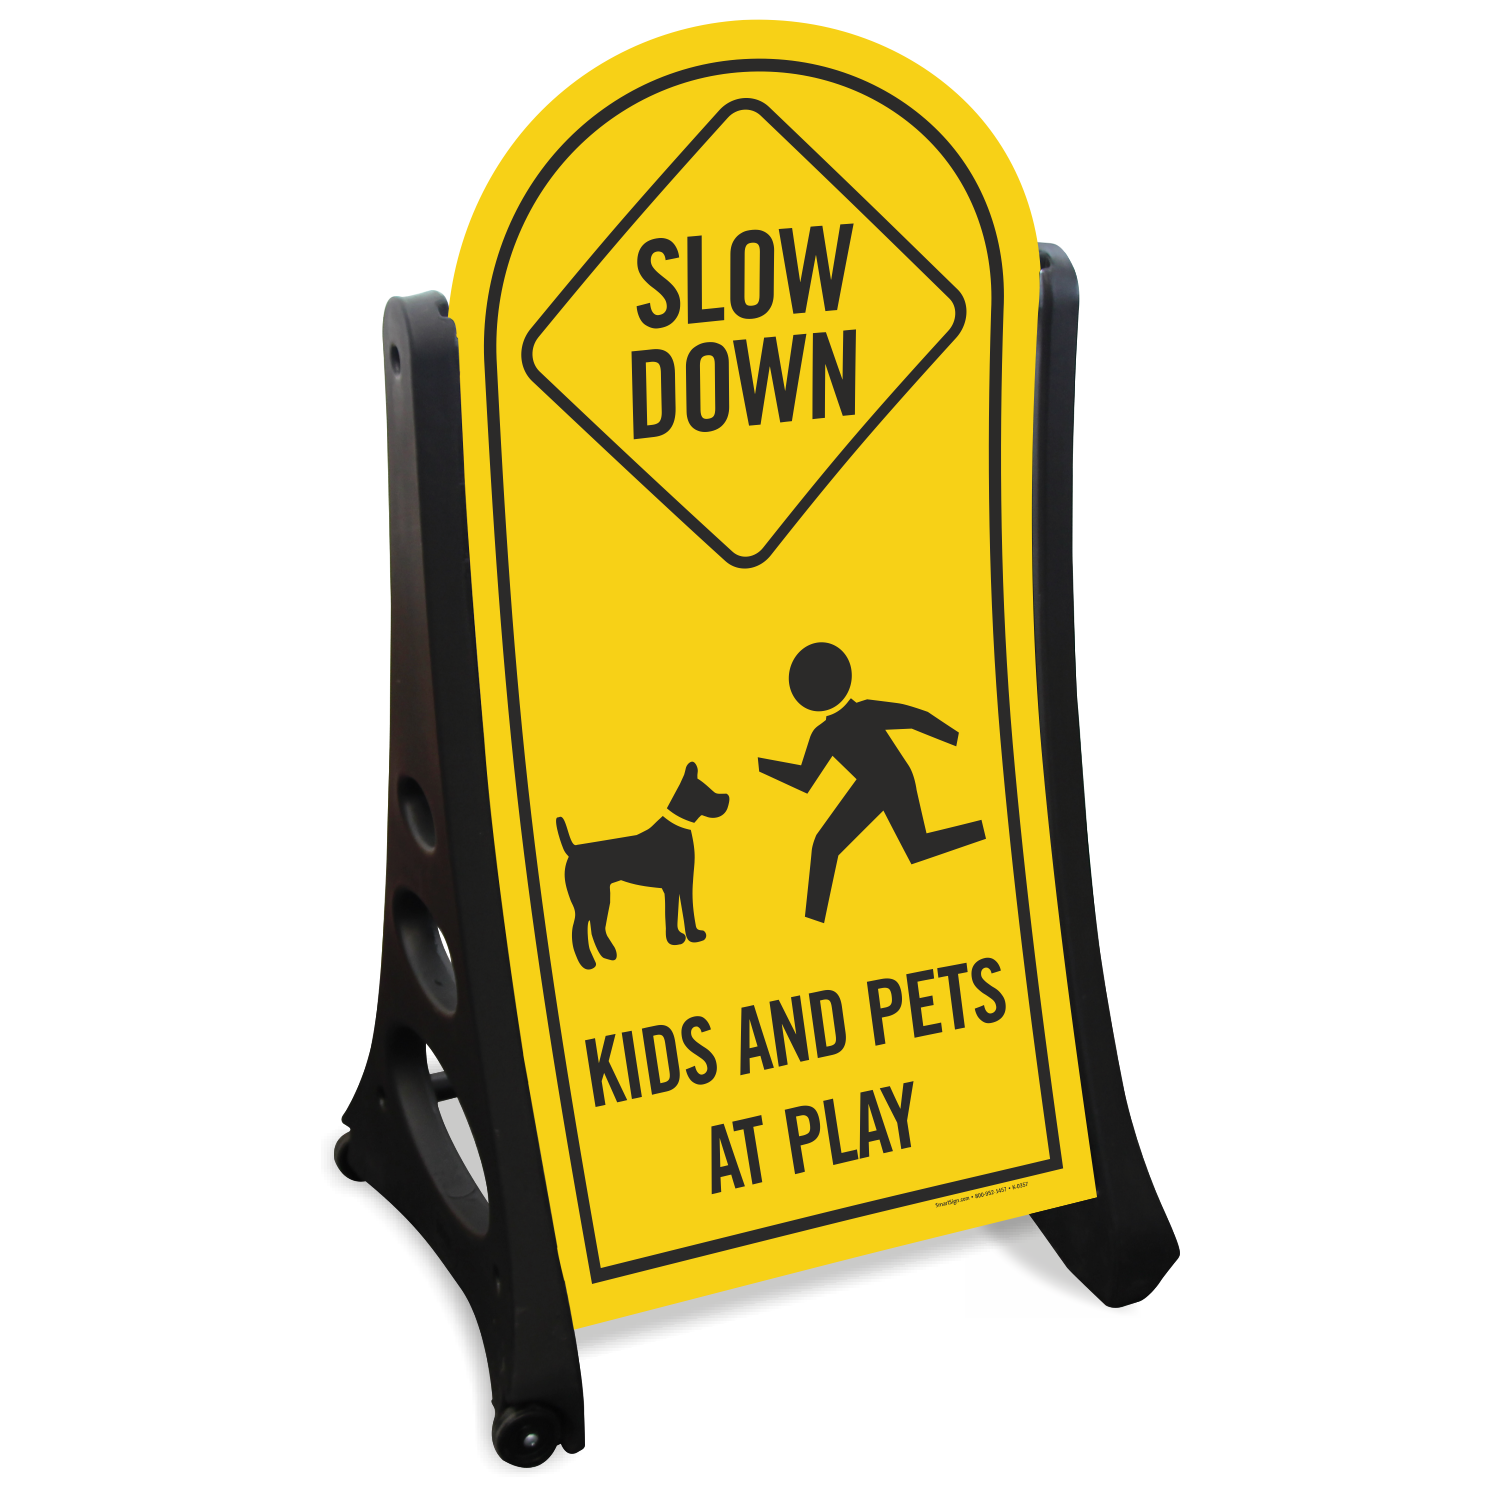 Kids And Pets At Play Slow Down Sidewalk Sign